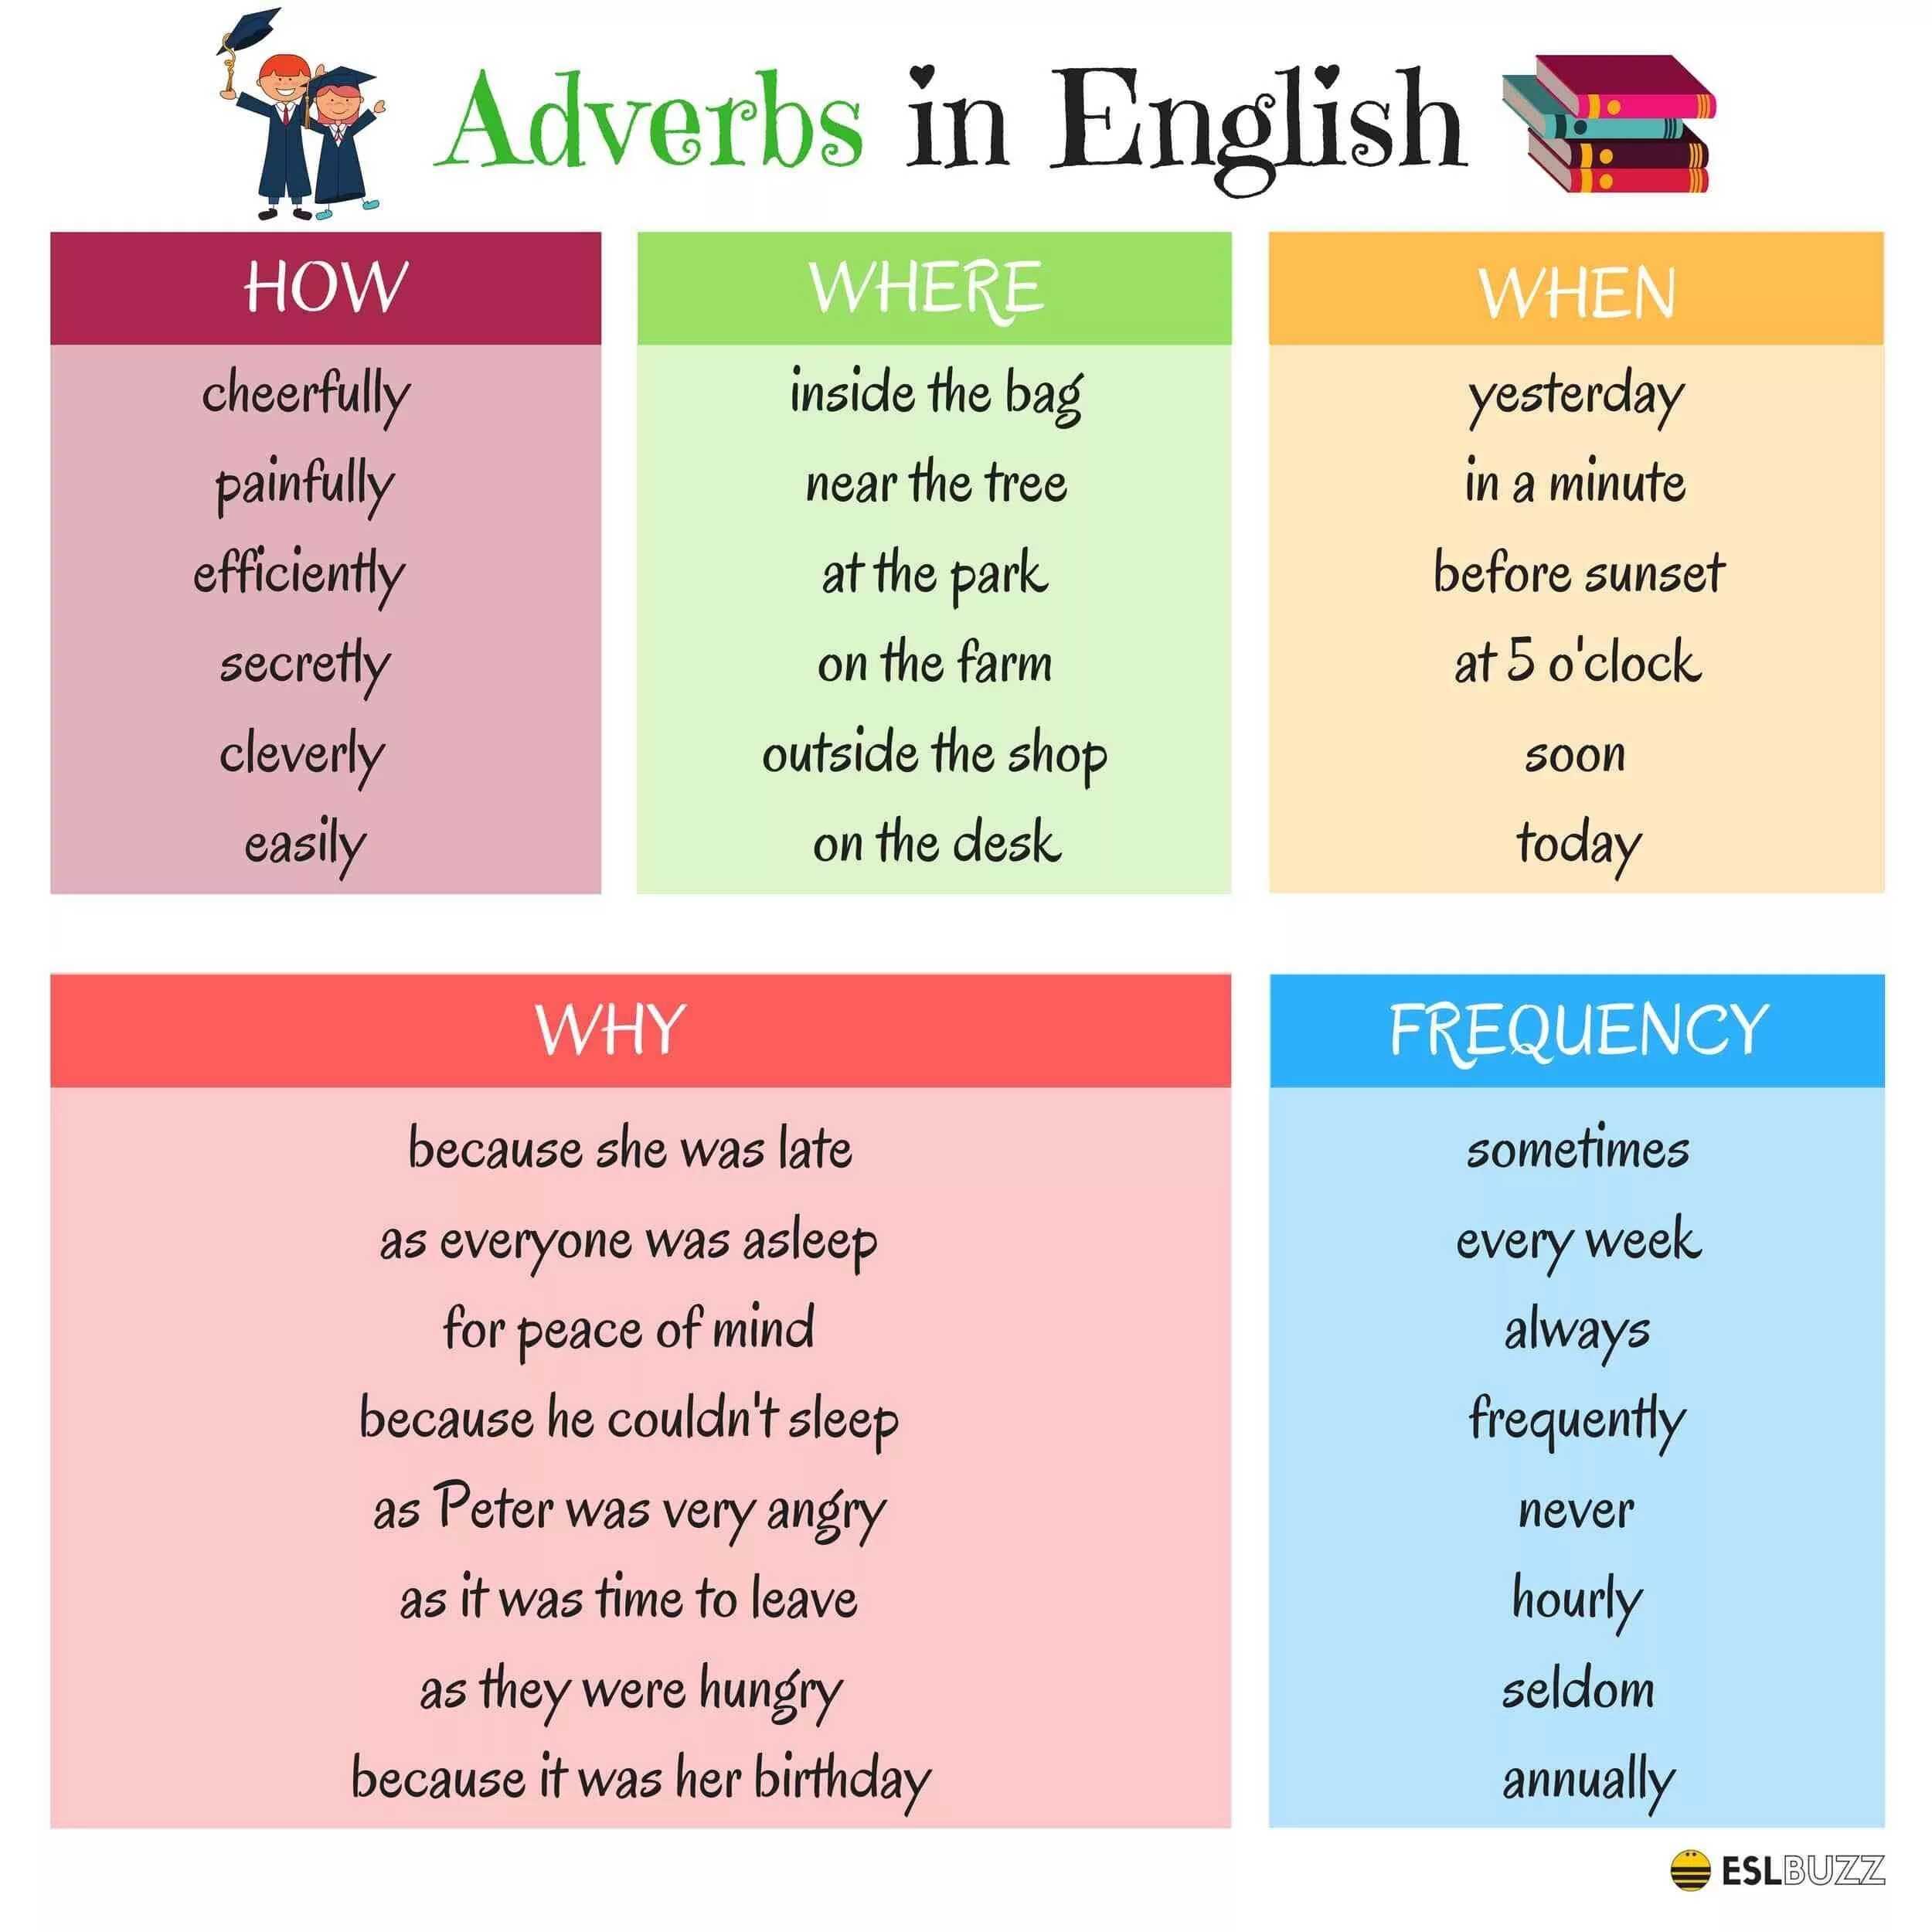 Adverbs in English. Adverbs в английском. Adverbs грамматика. Adverbs in English правила. Why she be late